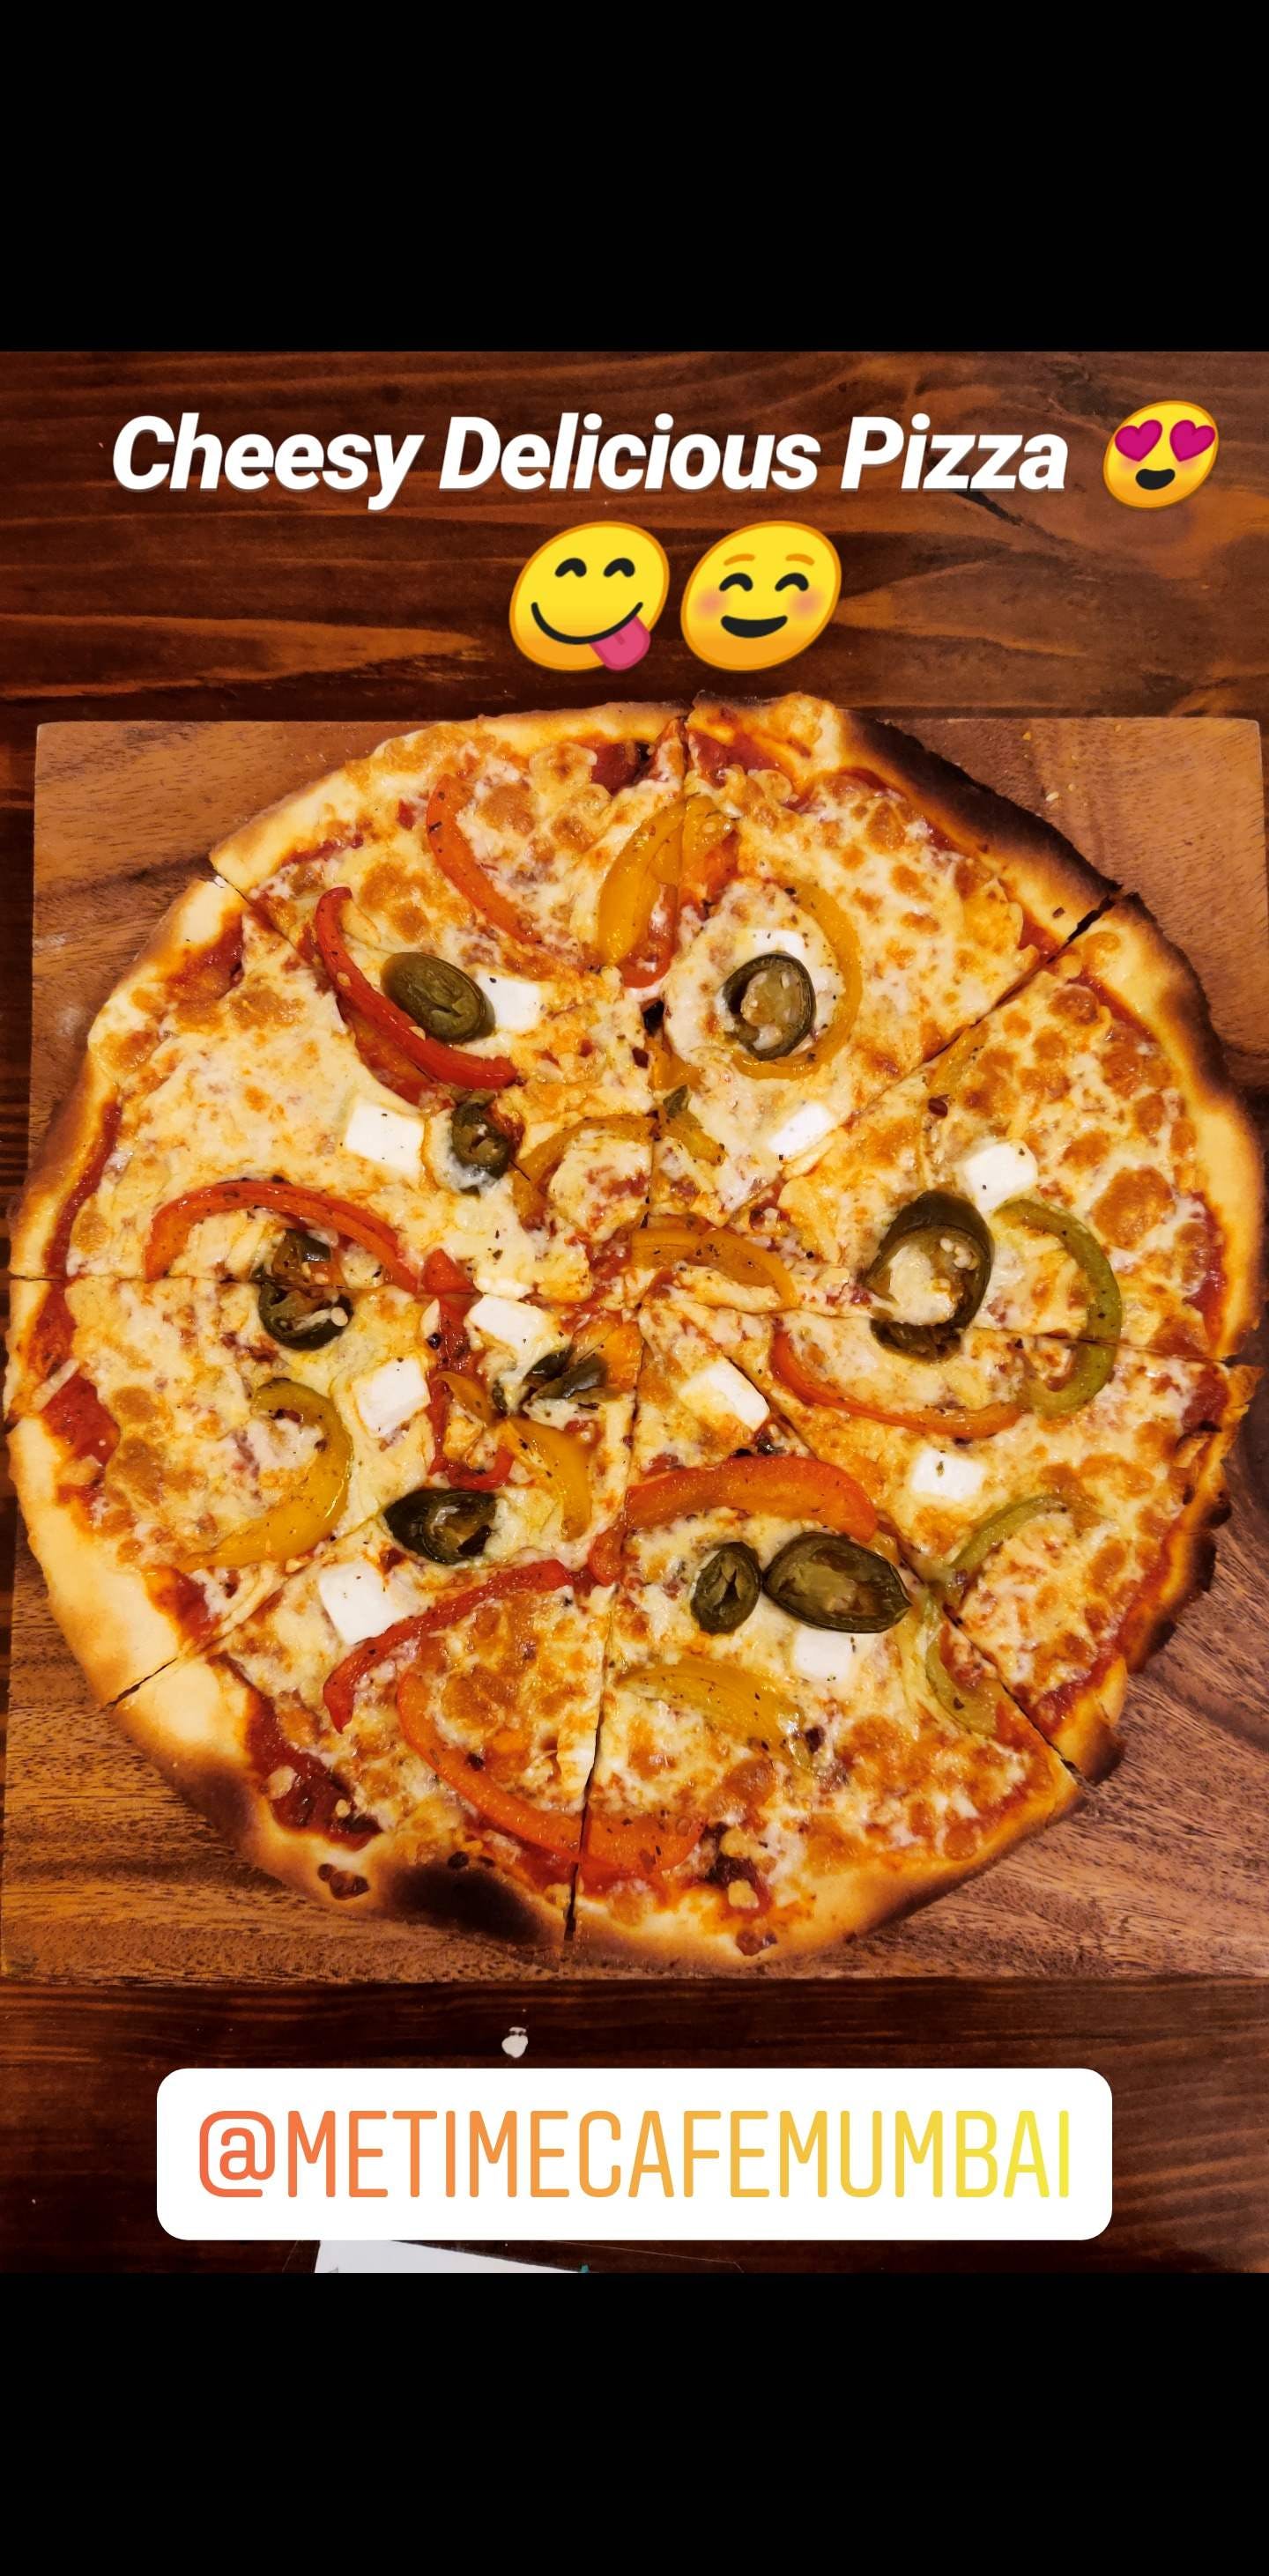 Dish,Pizza,Food,Cuisine,Pizza cheese,Ingredient,California-style pizza,Flatbread,Comfort food,Fast food